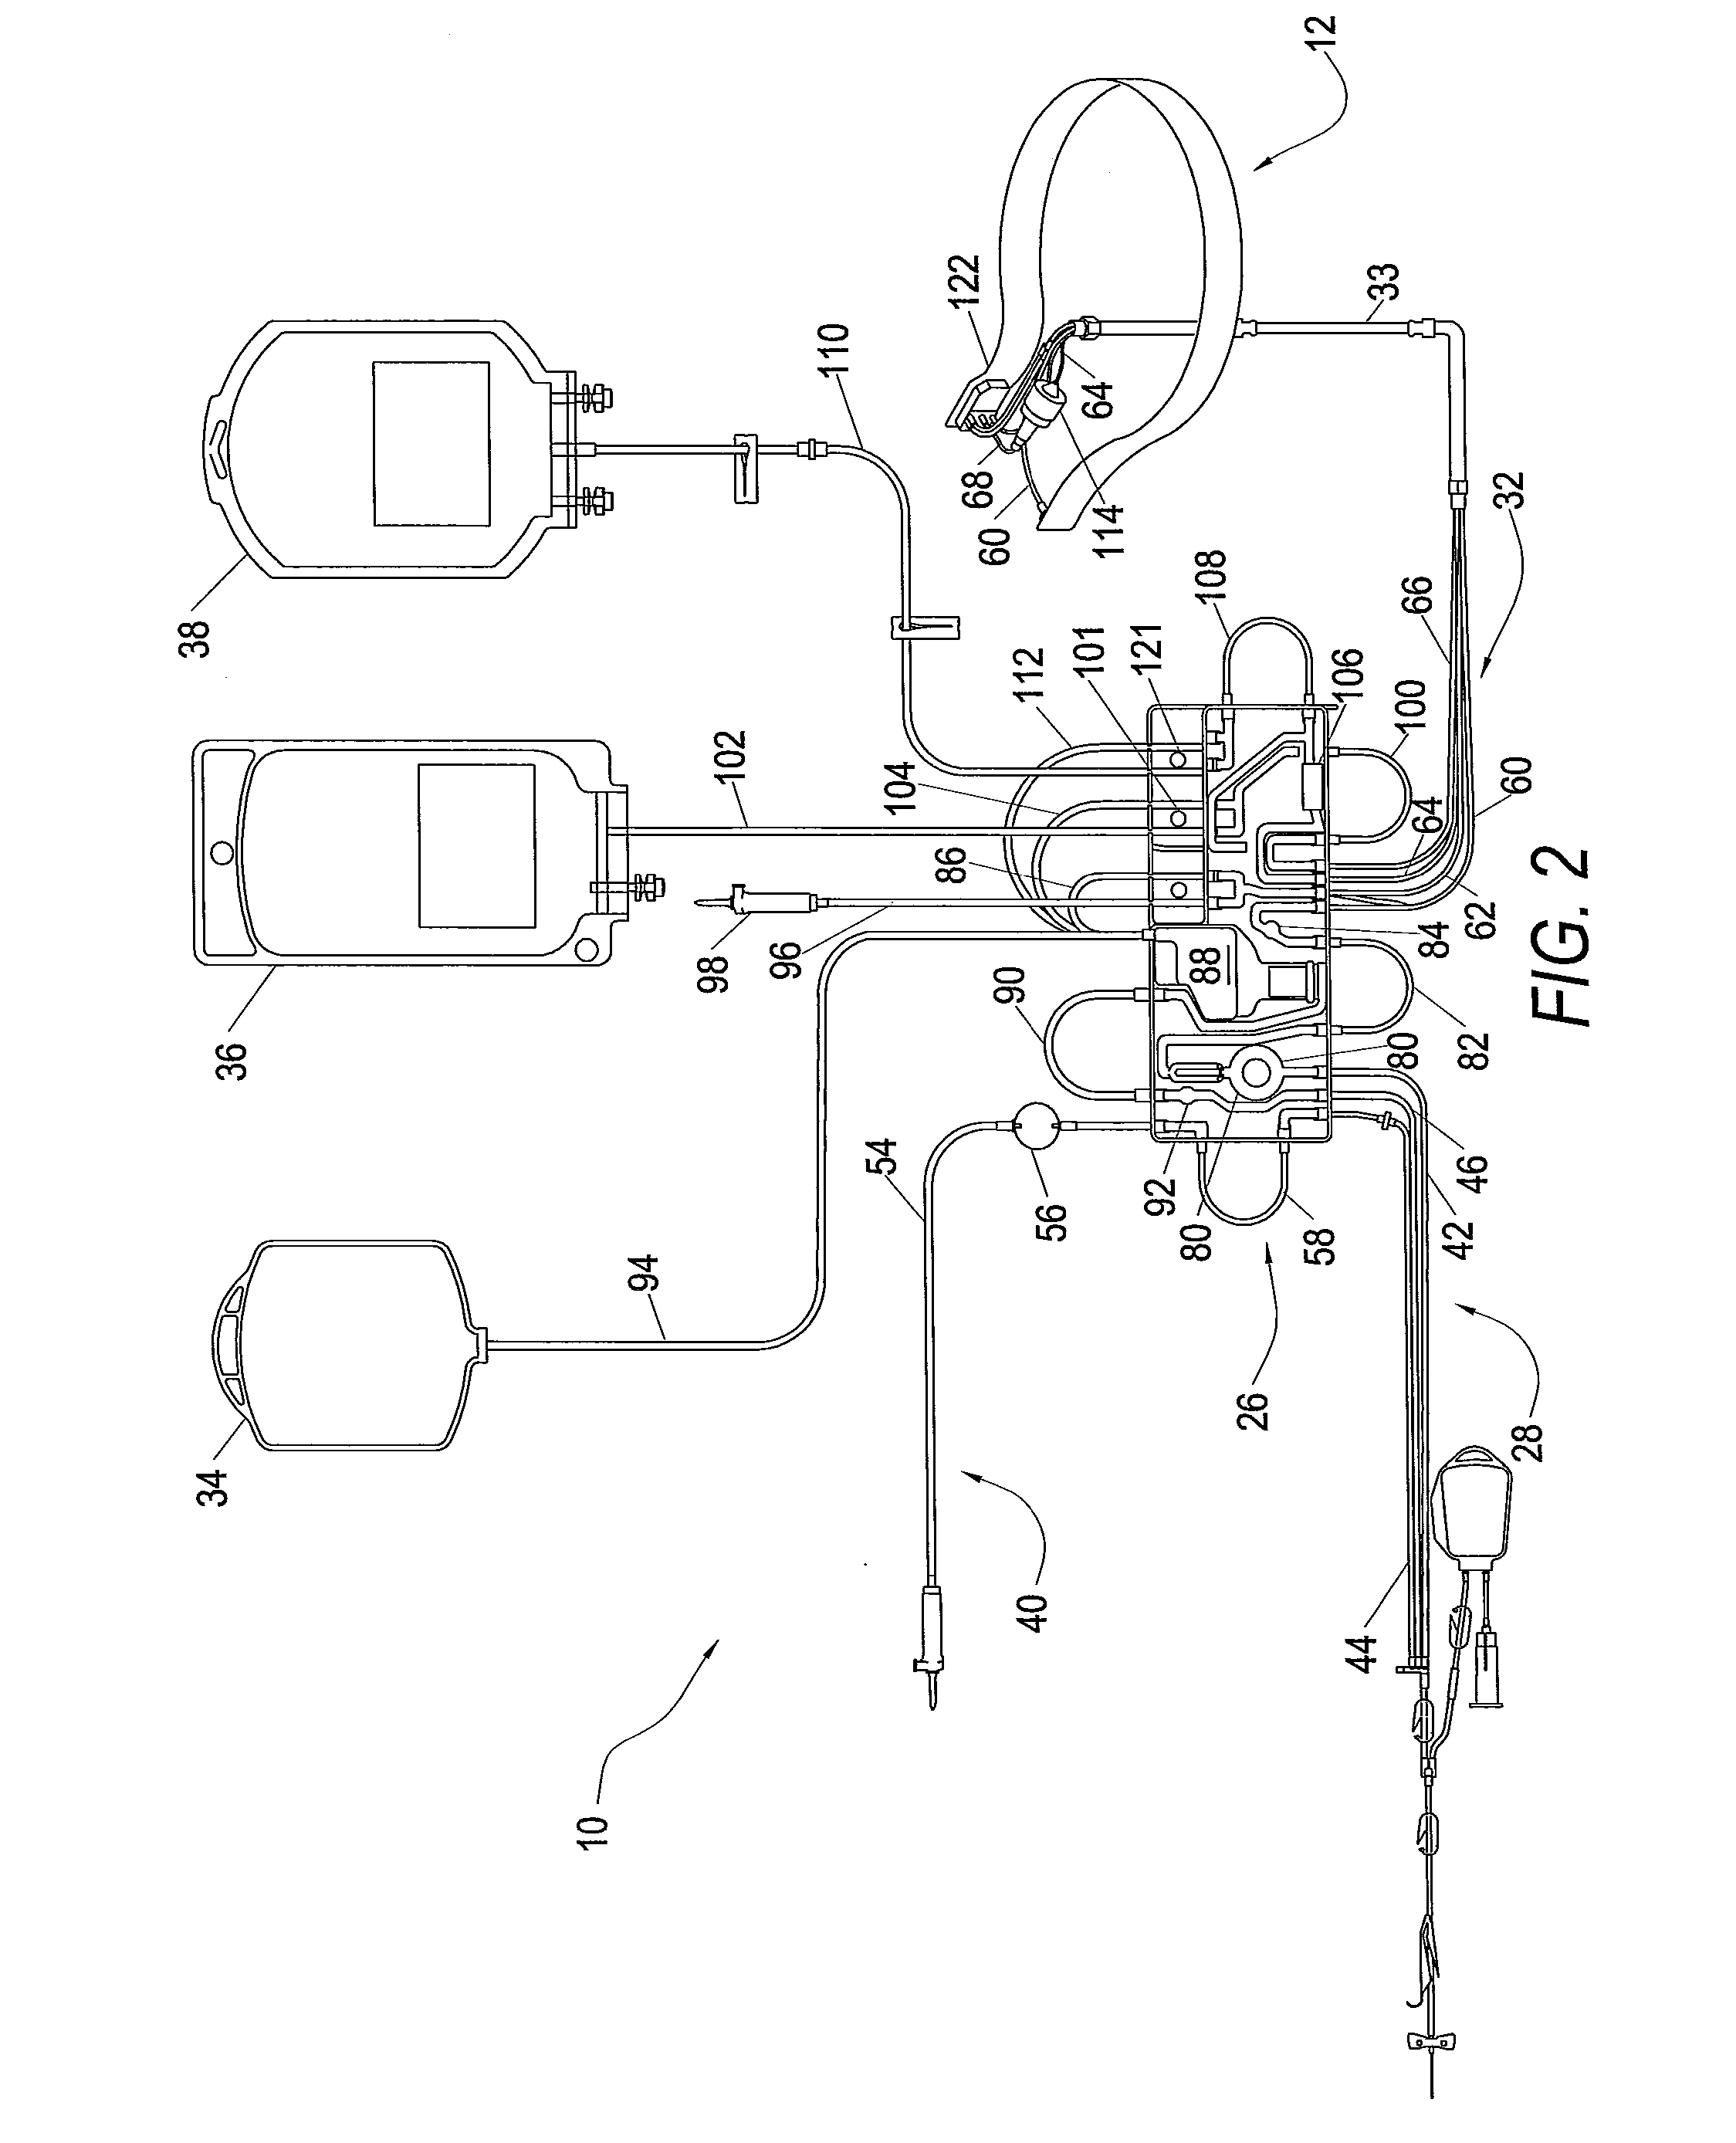 System for Blood Separation with a Separation Chamber Having an Internal Gravity Valve